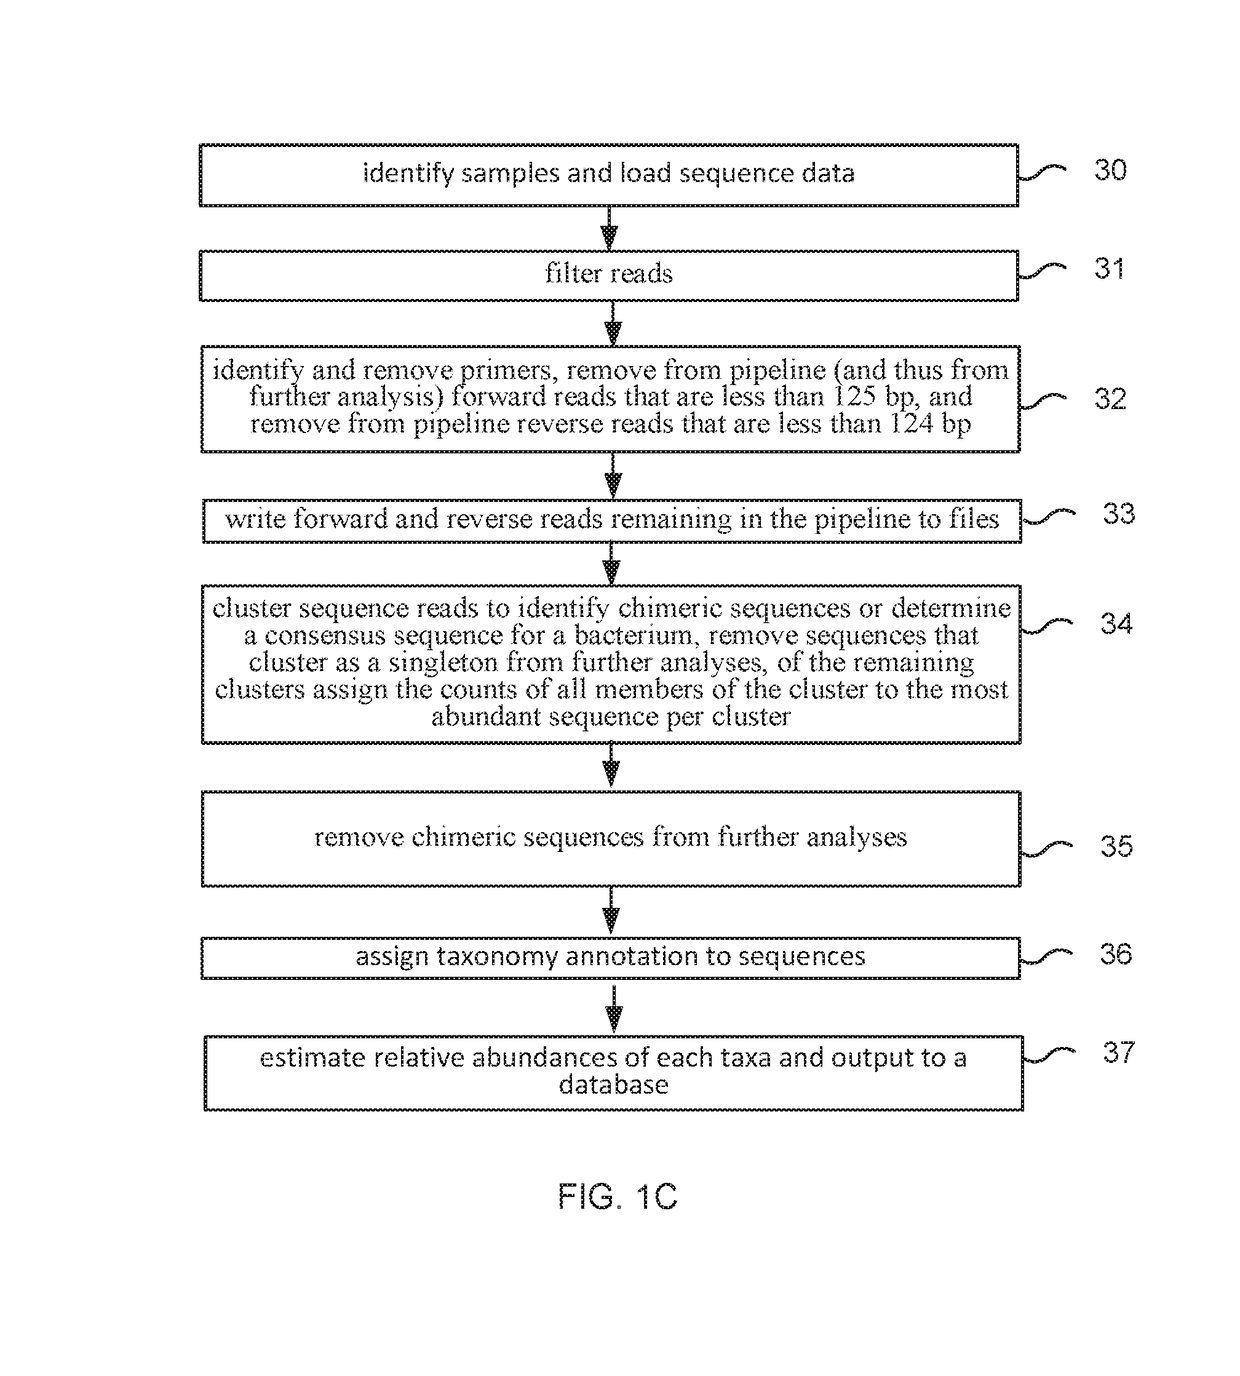 Method and system for microbiome-derived diagnostics and therapeutics for conditions associated with gastrointestinal health